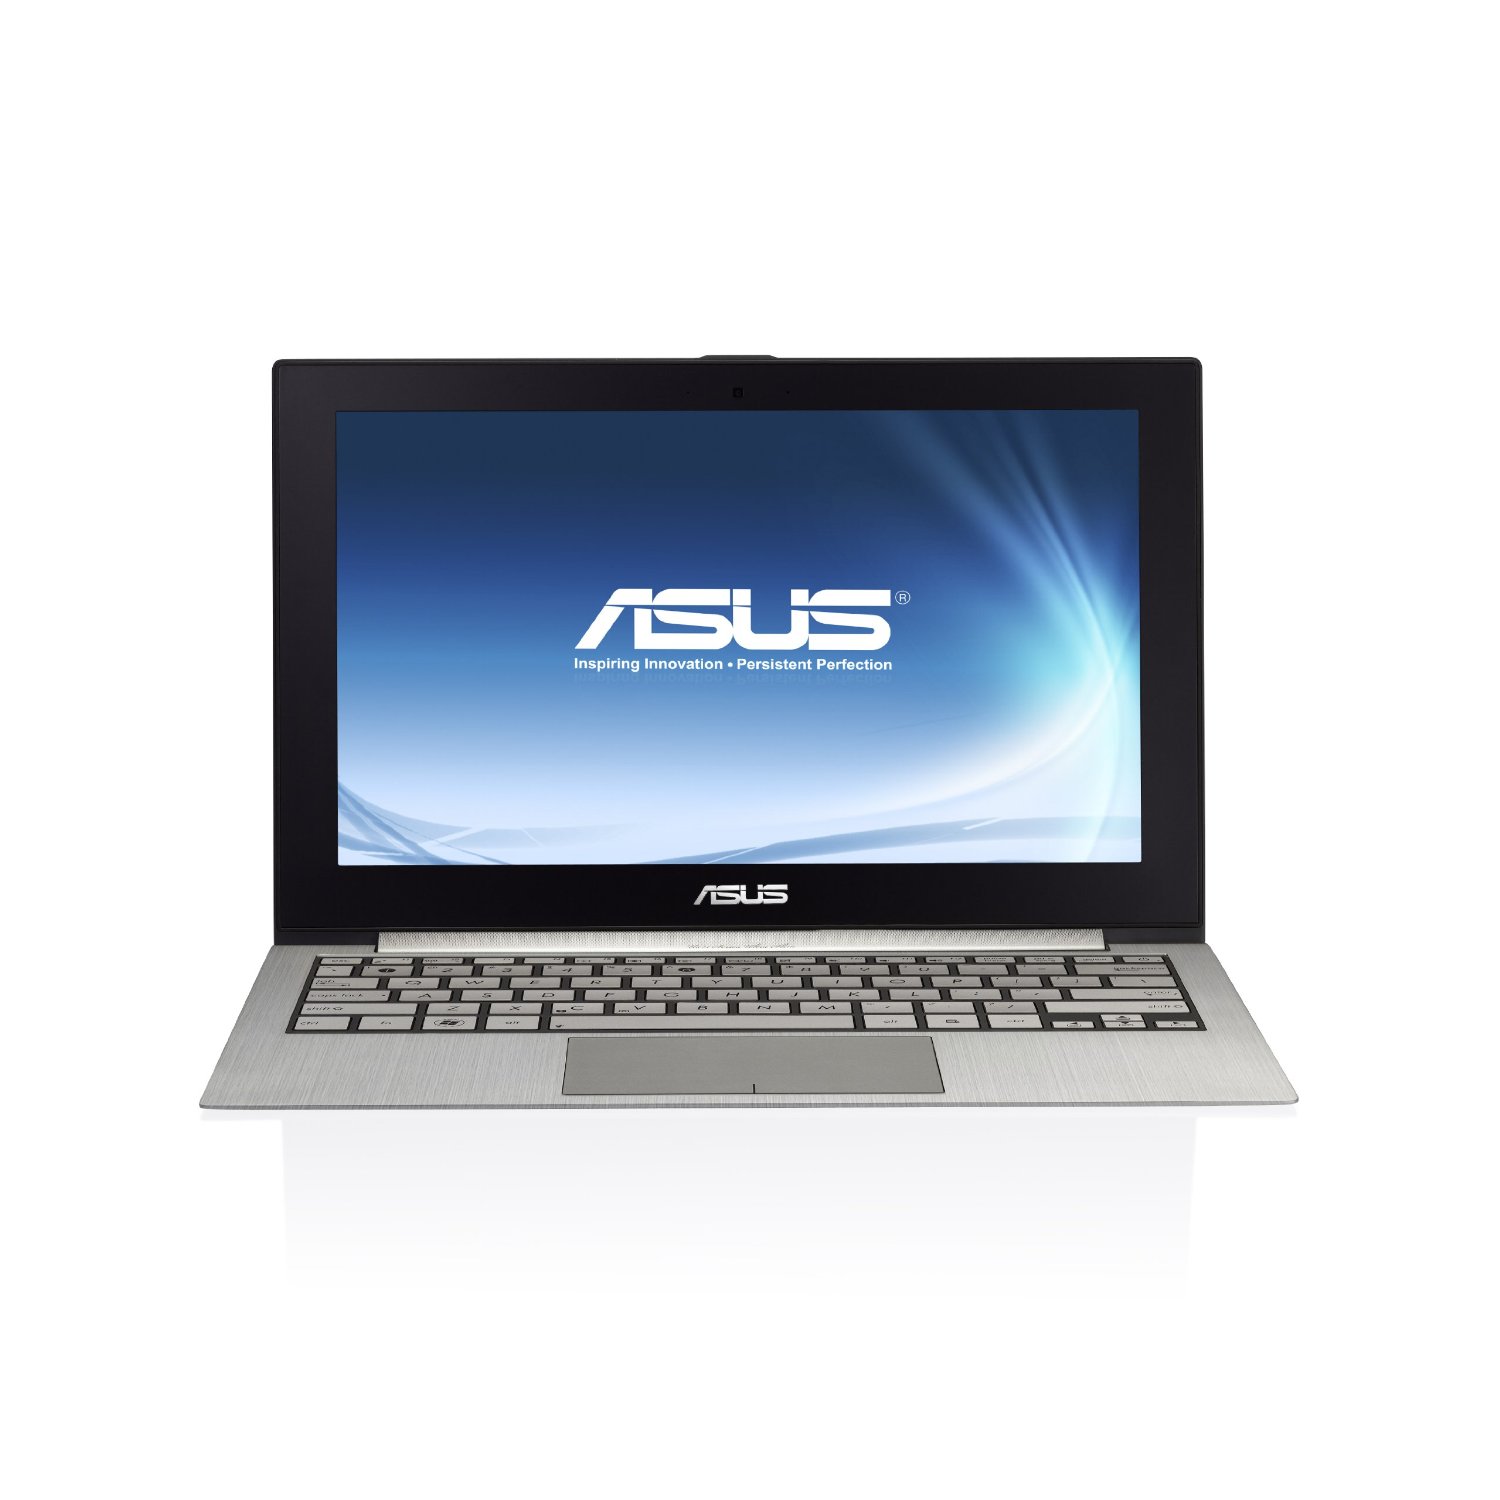 http://thetechjournal.com/wp-content/uploads/images/1112/1325329657-asus-zenbook-ux21edh71-116inch-thin-and-light-ultrabook-1.jpg